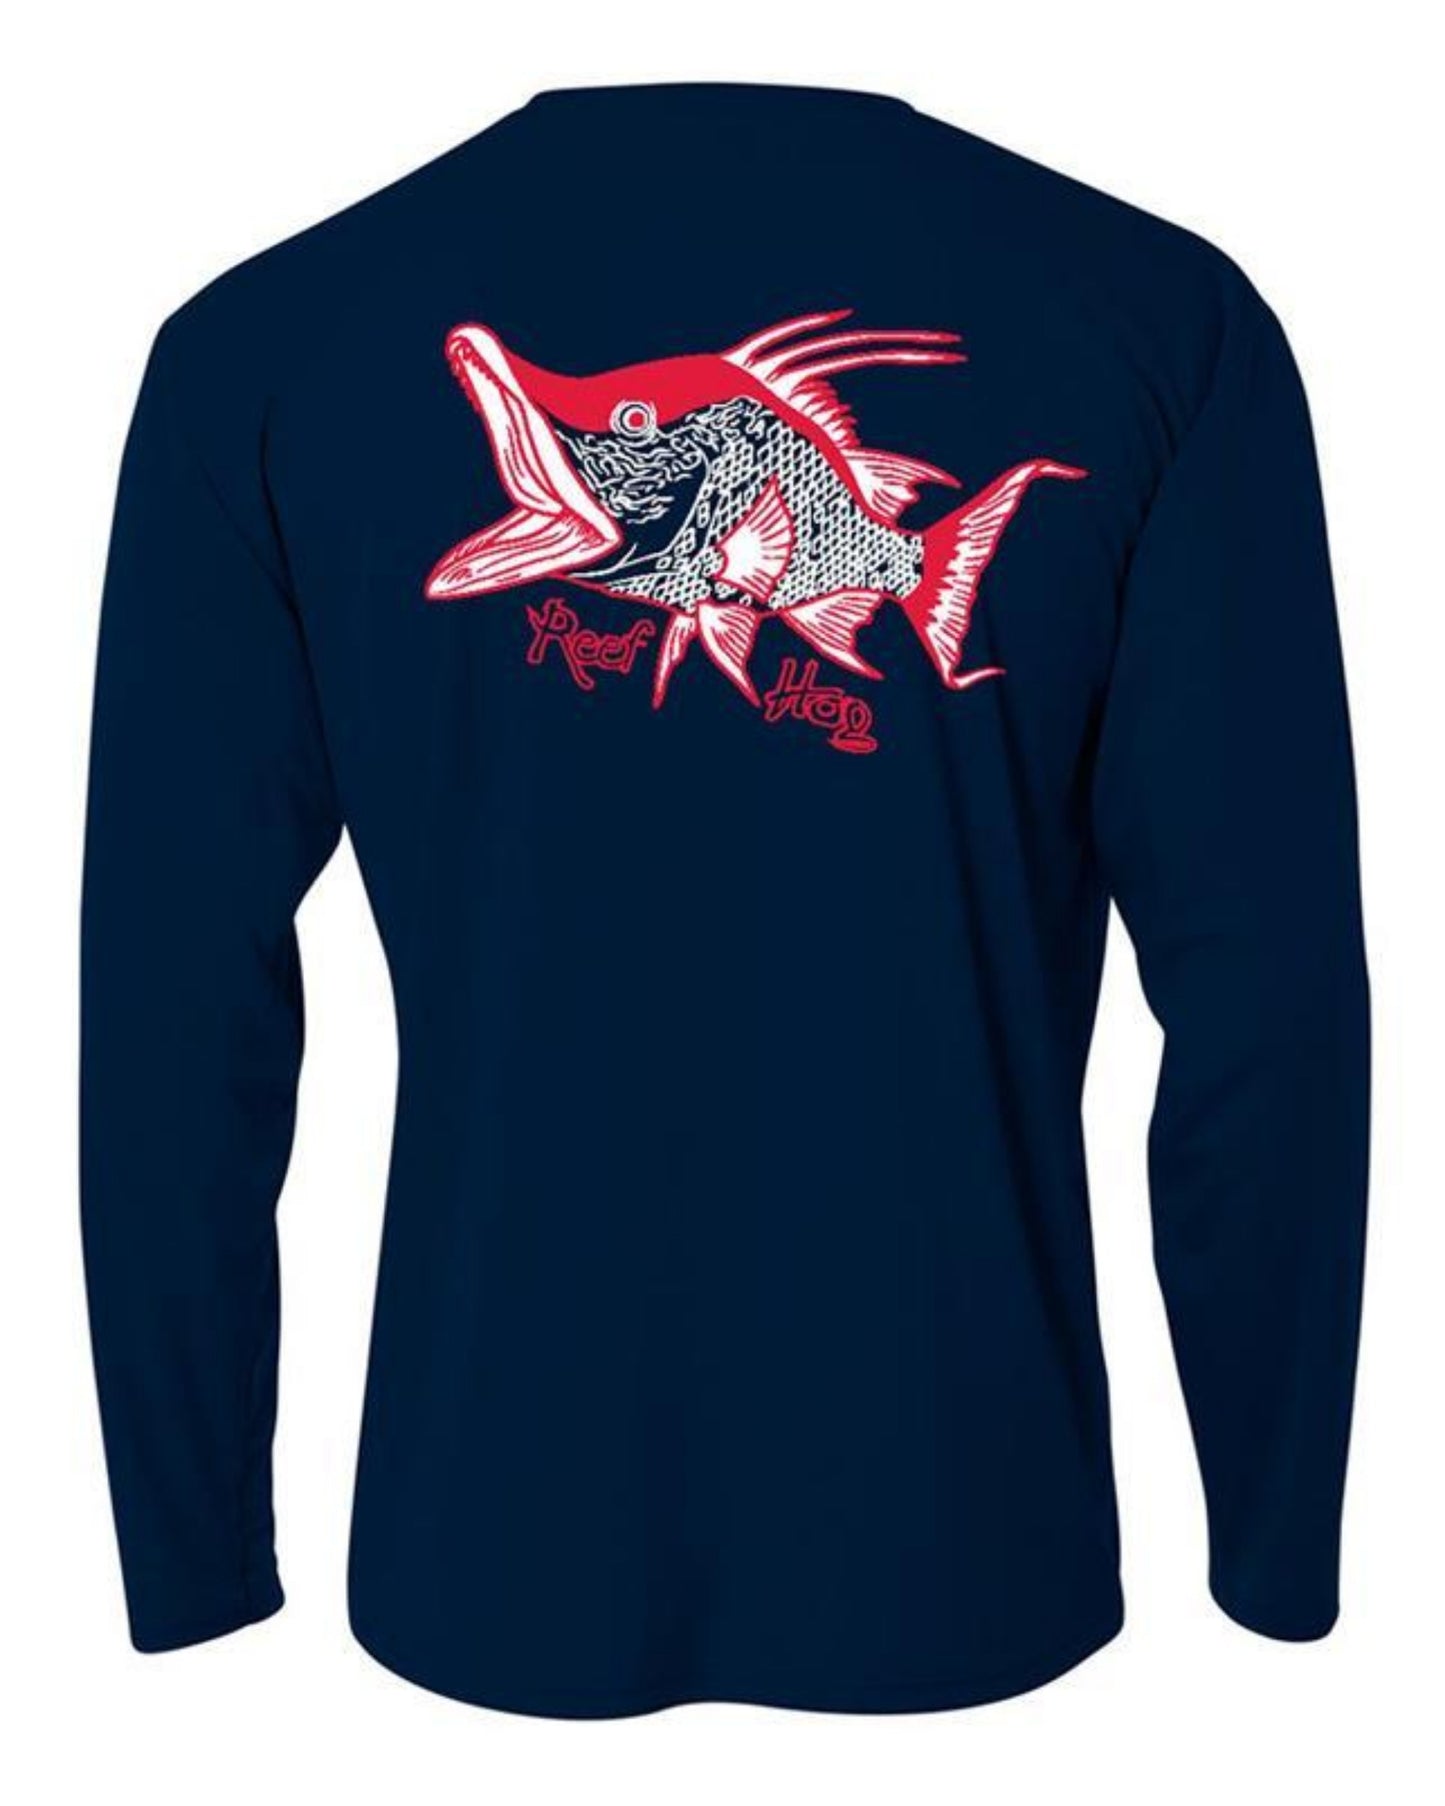 Hogfish "Reef Hog" Performance Dry-fit Long Sleeve Navy Shirt with 50+ UV Sun Protection